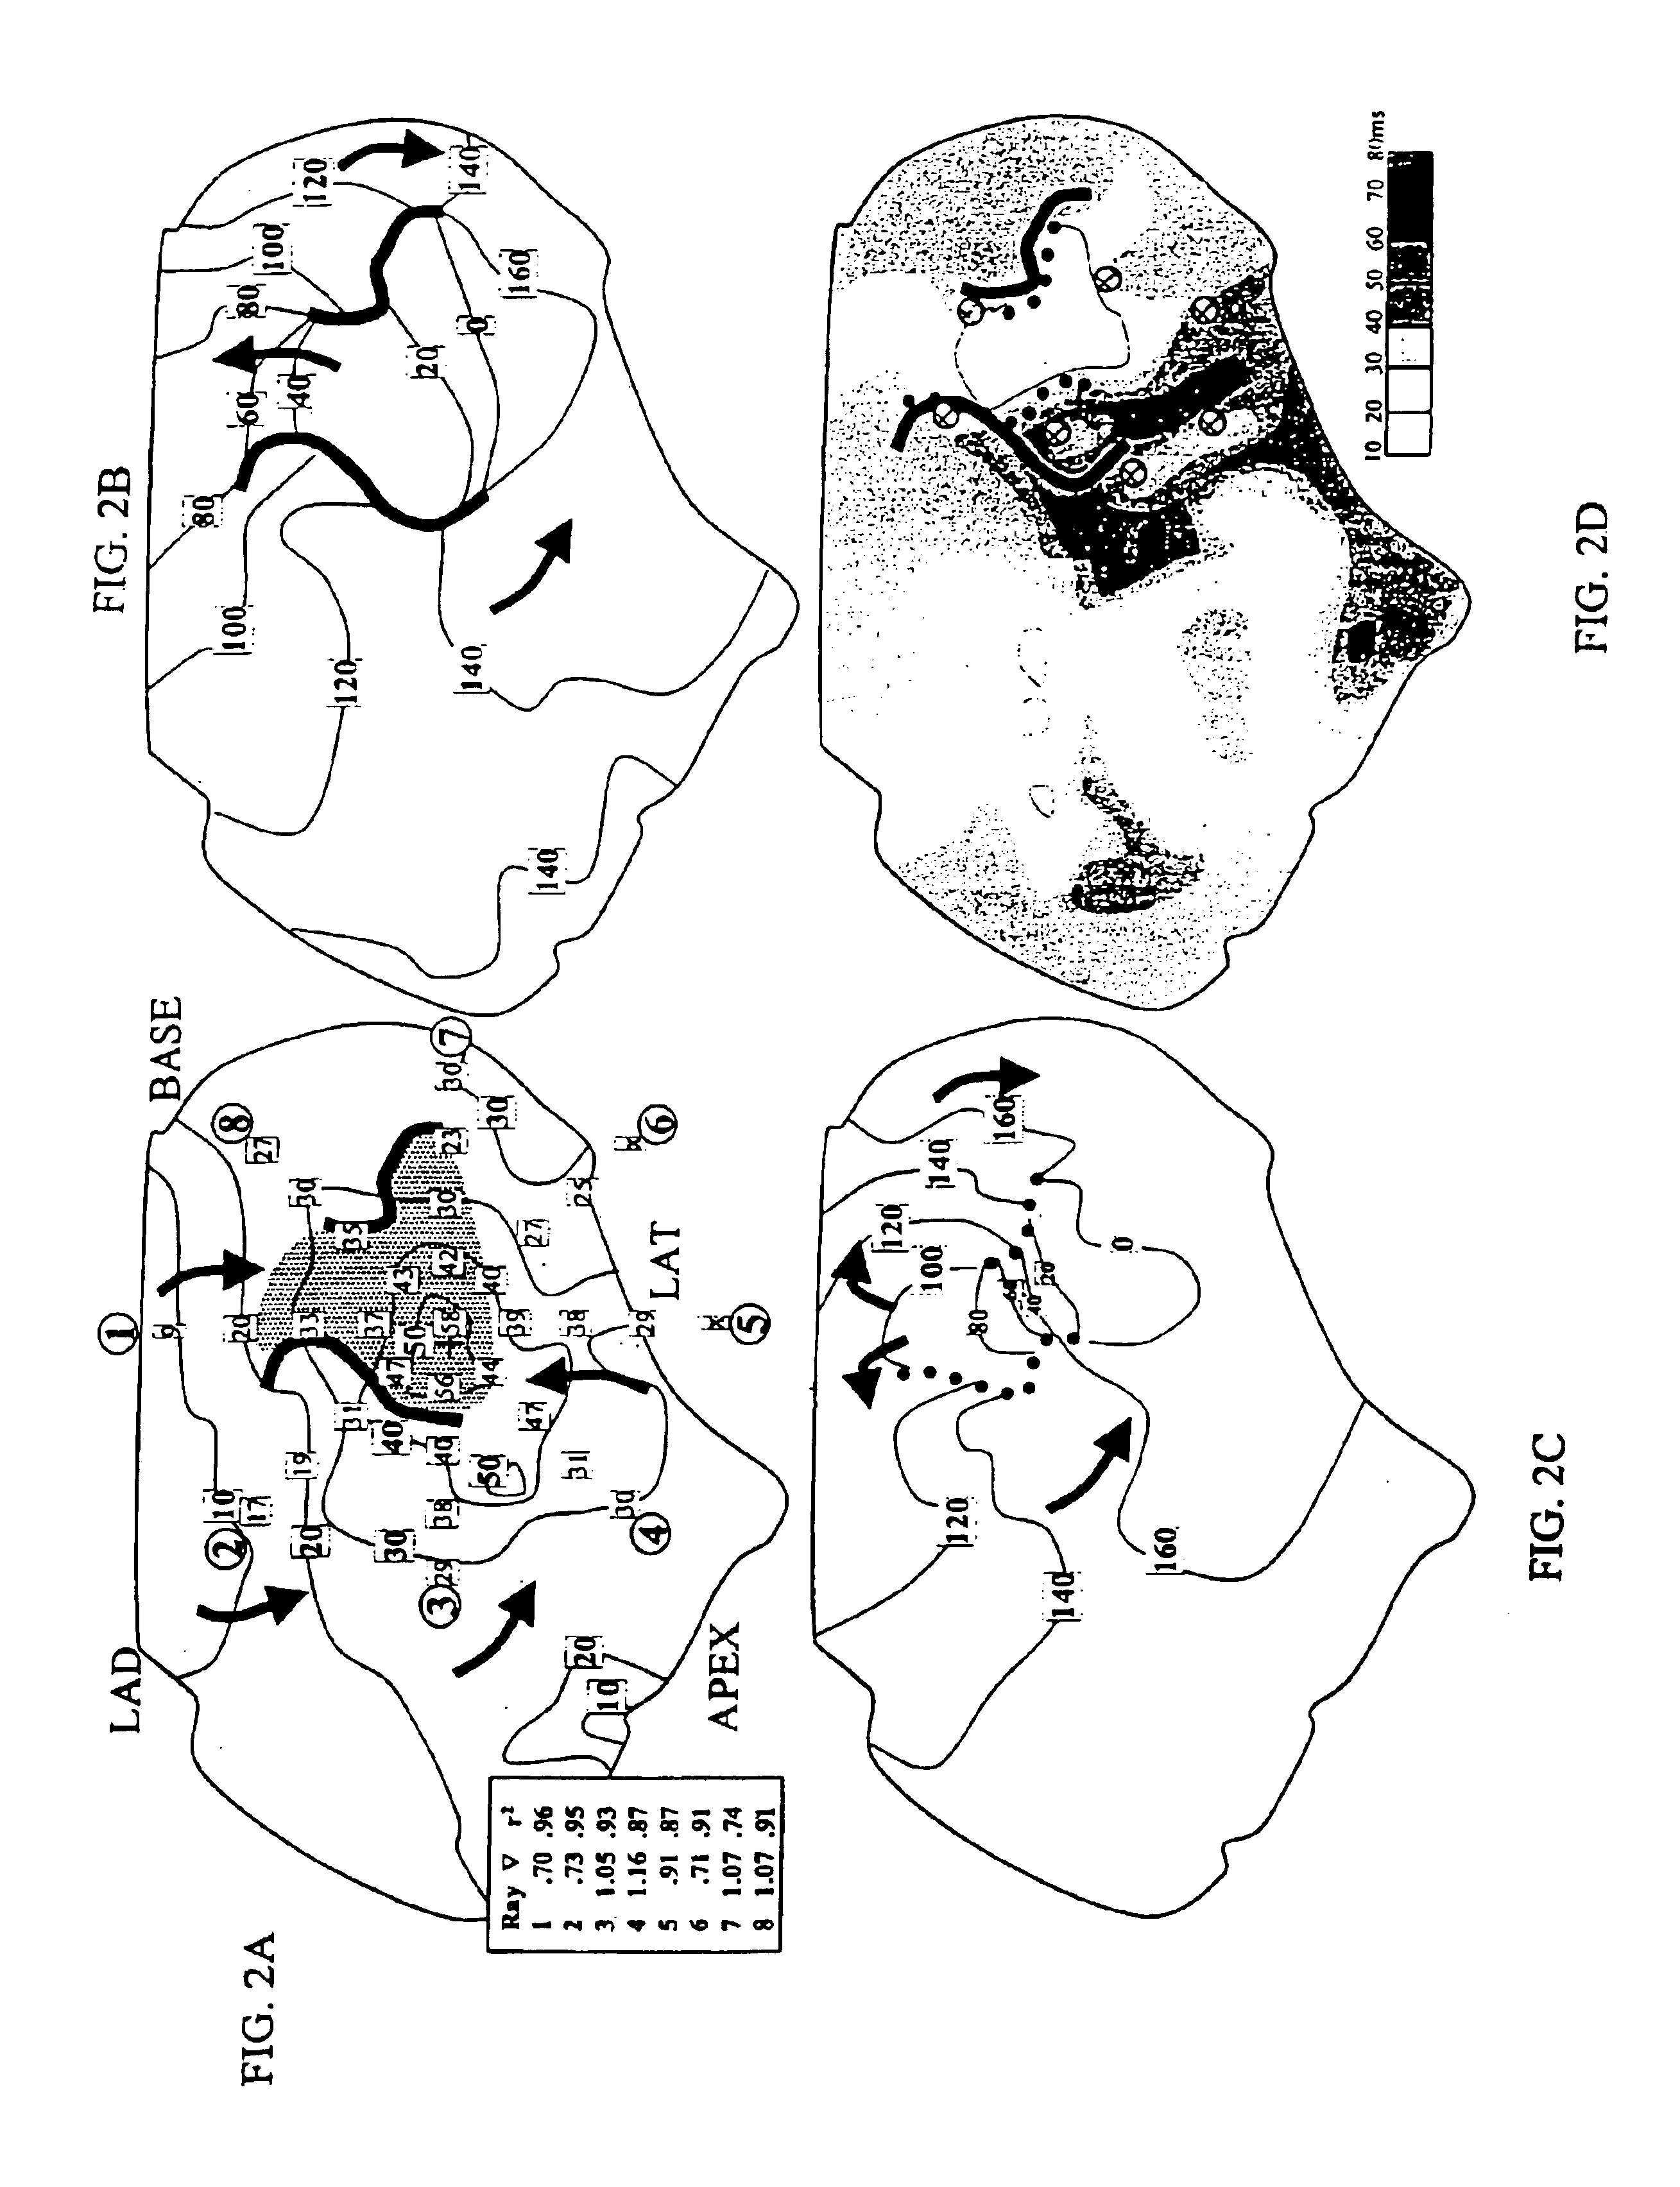 System and method for determining reentrant ventricular tachycardia isthmus location and shape for catheter ablation